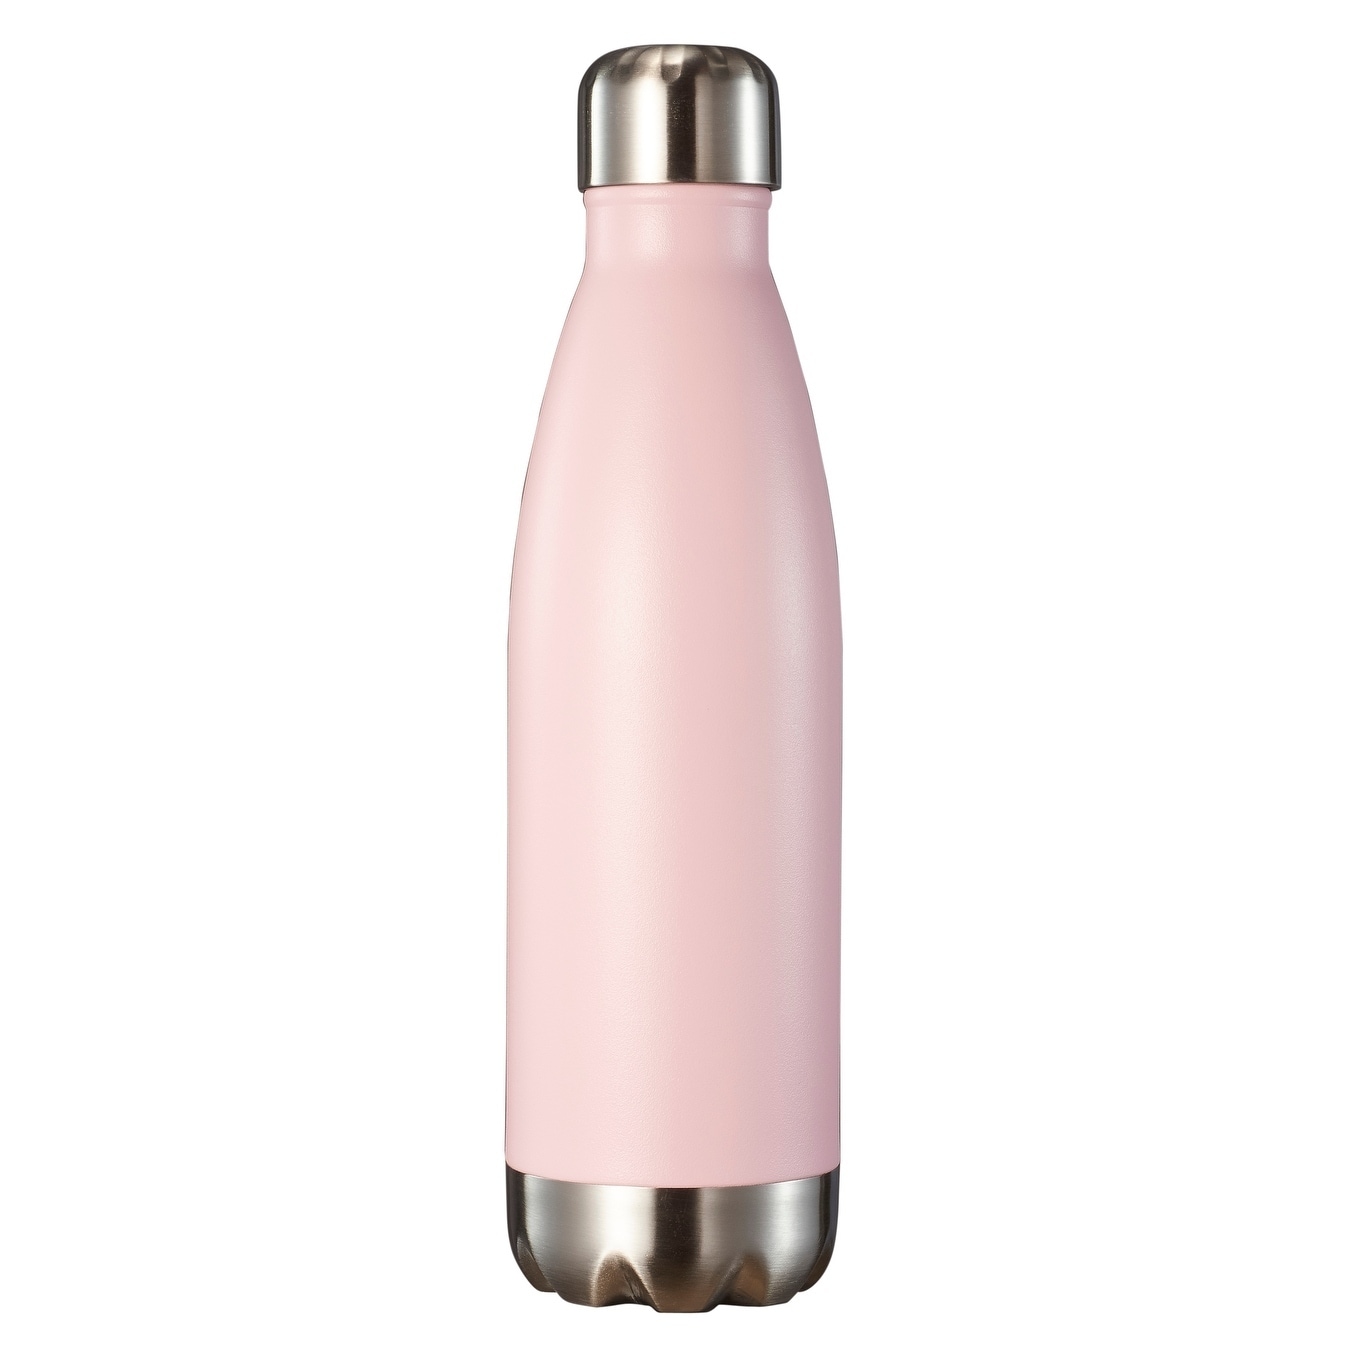 BOZ Stainless Steel Water Bottle XL (1 L / 32oz) Wide Mouth (Light